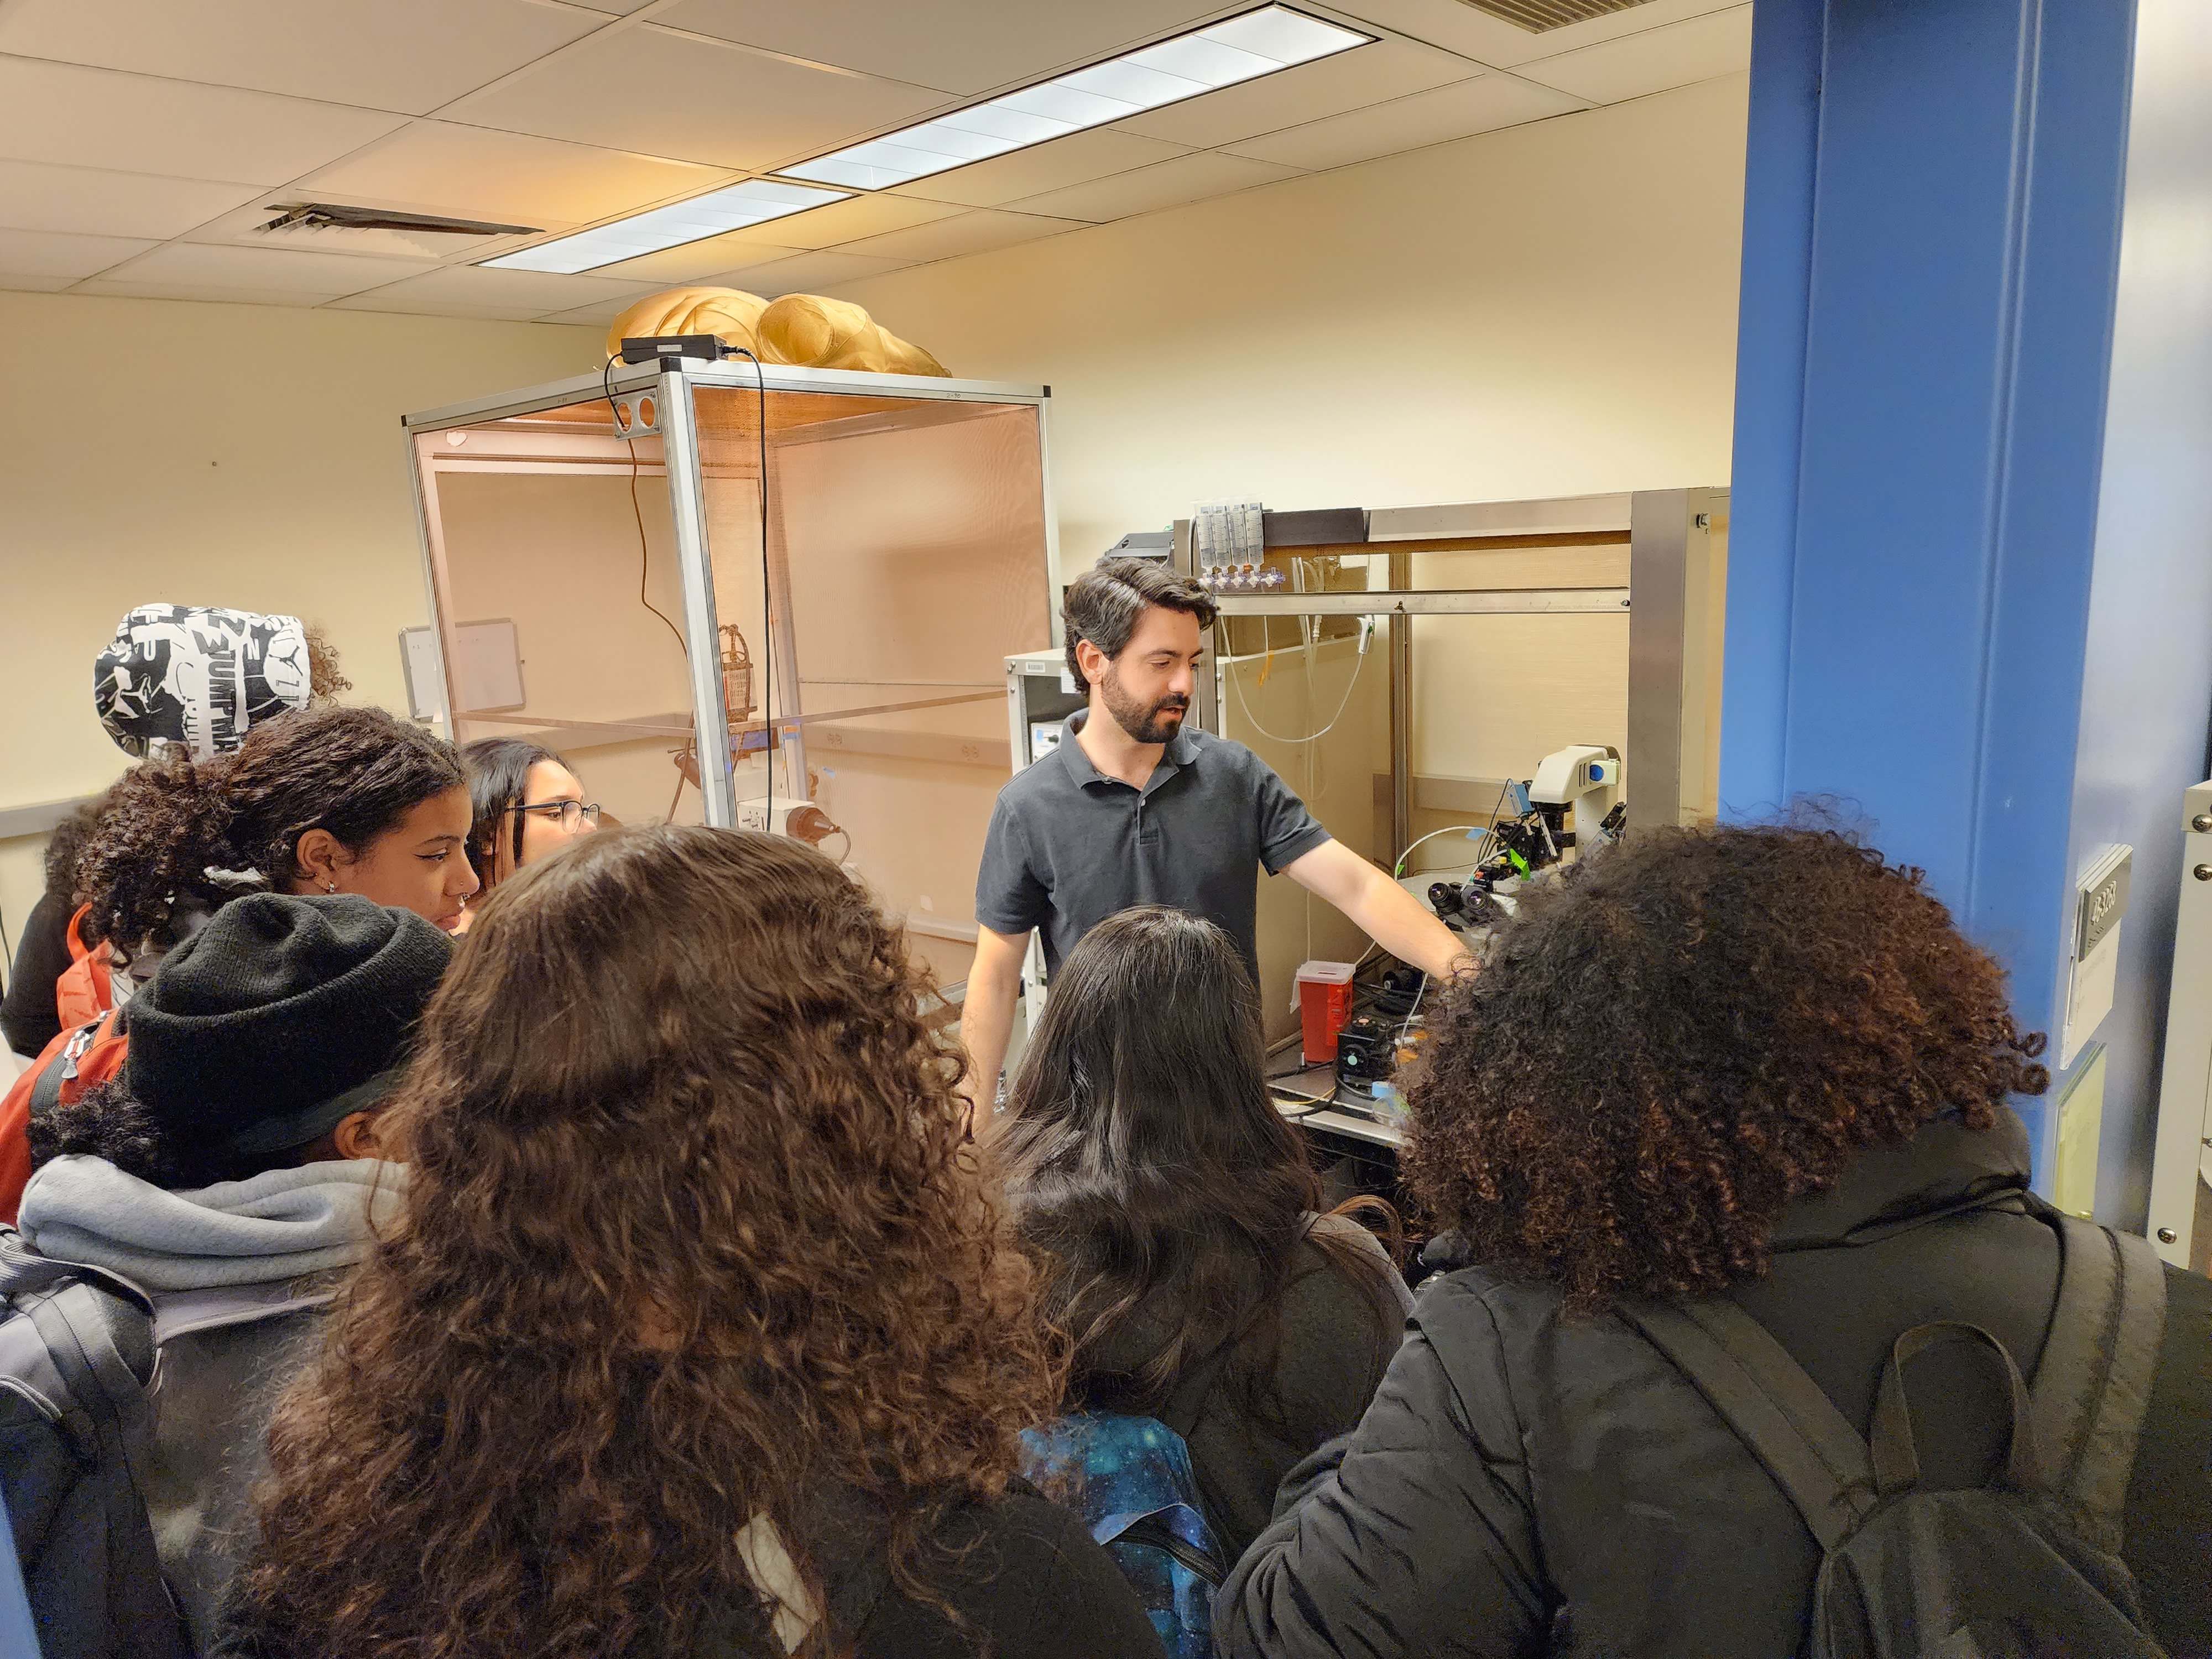 Andres Crane gestures toward an electrophysiology rig as seven high school students look on